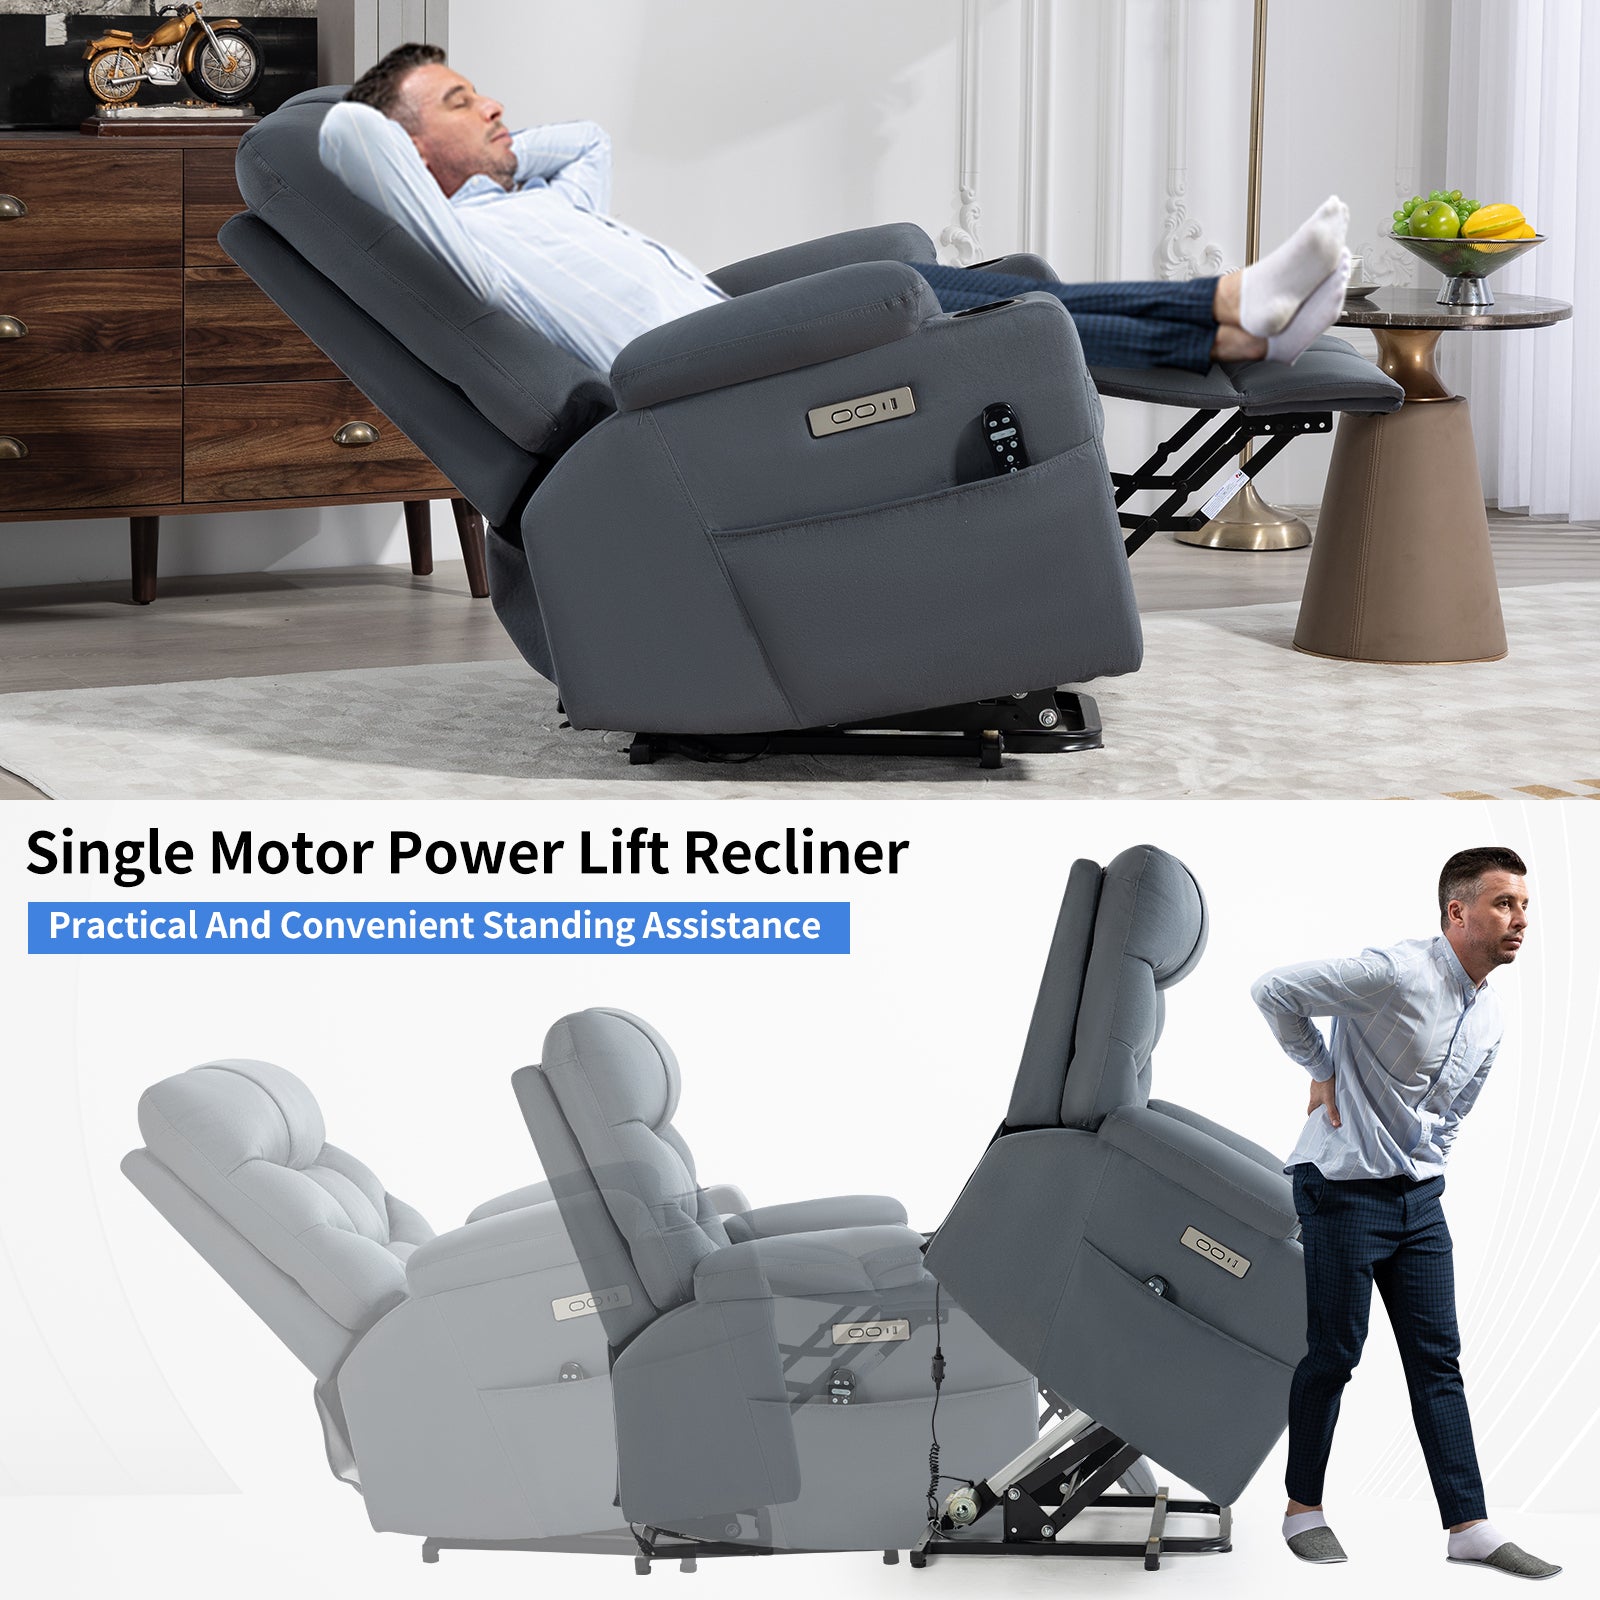 Mason Suede Power Lift Recliner with Massage and Heating, USB Charge Ports and Cup Holder